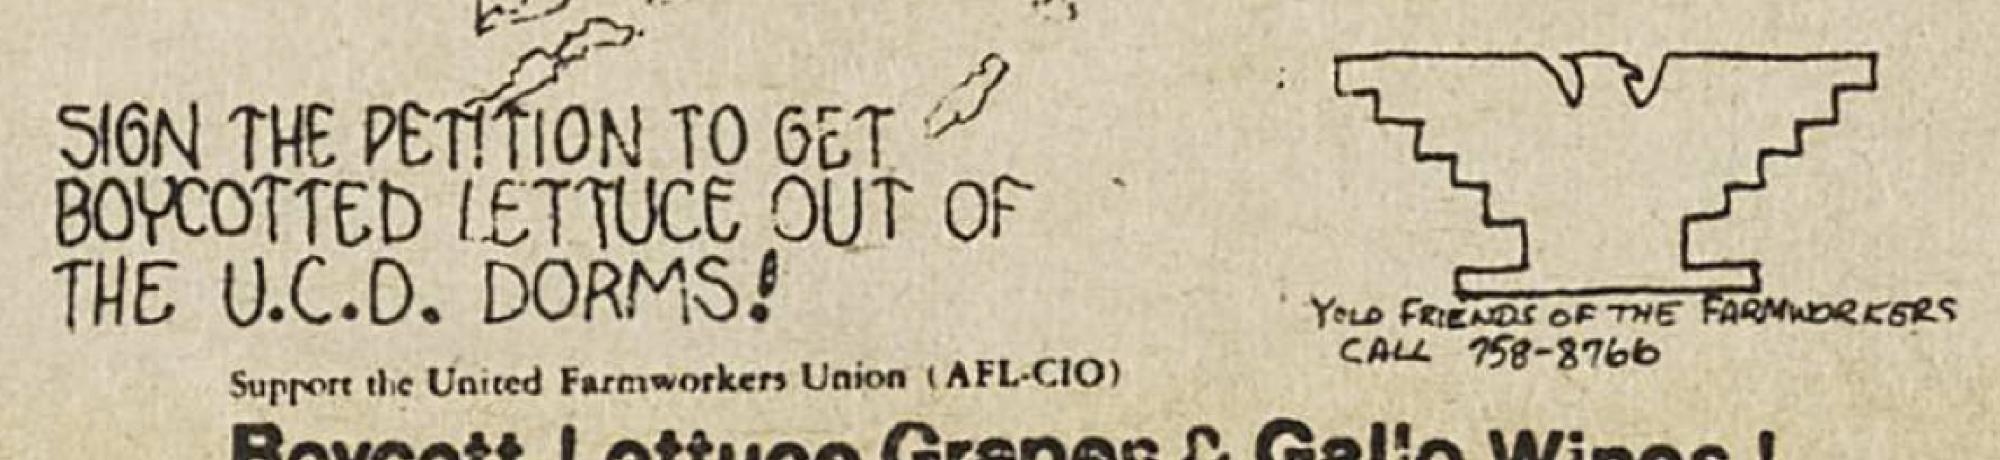 Advert to SIGqN THE PErTiON TO GET BOYCOTTED LETTUCE OUT OF THE U.C.D. DORMS!